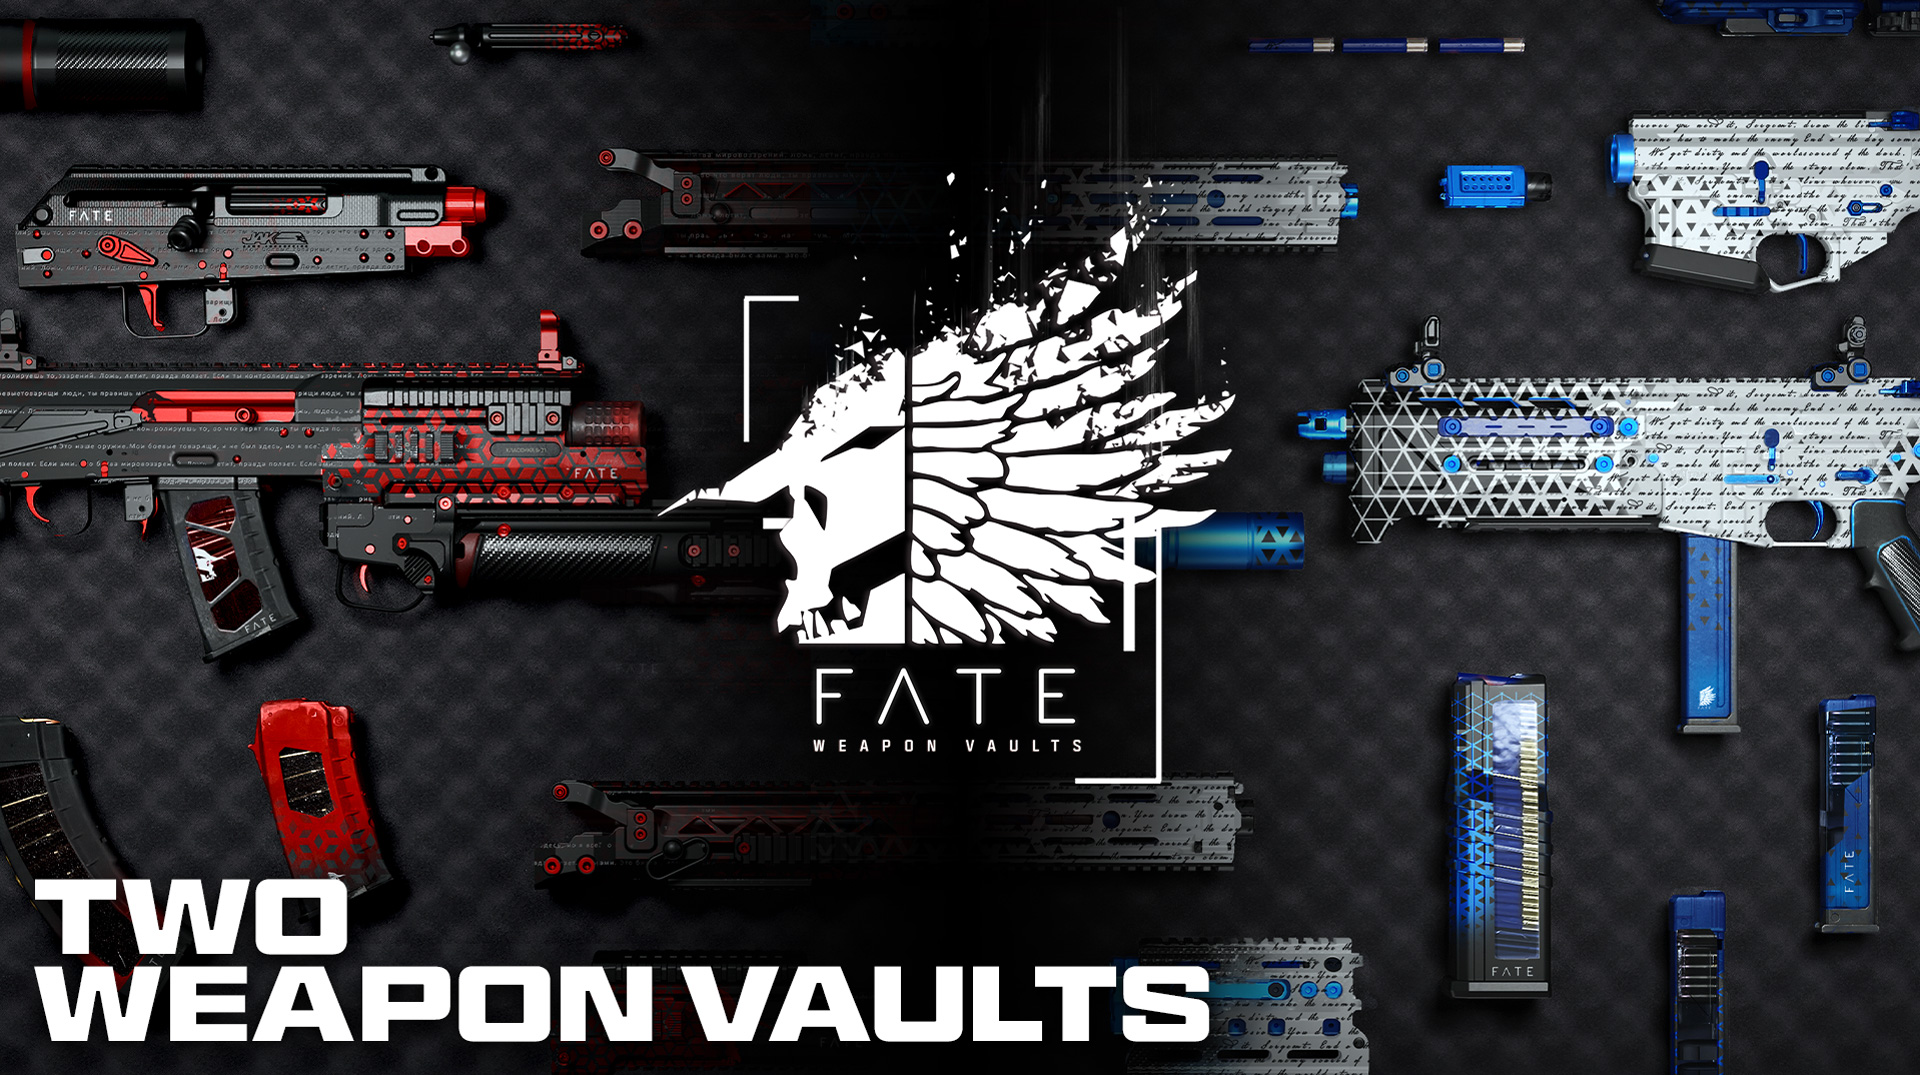 Fate Weapons Vault